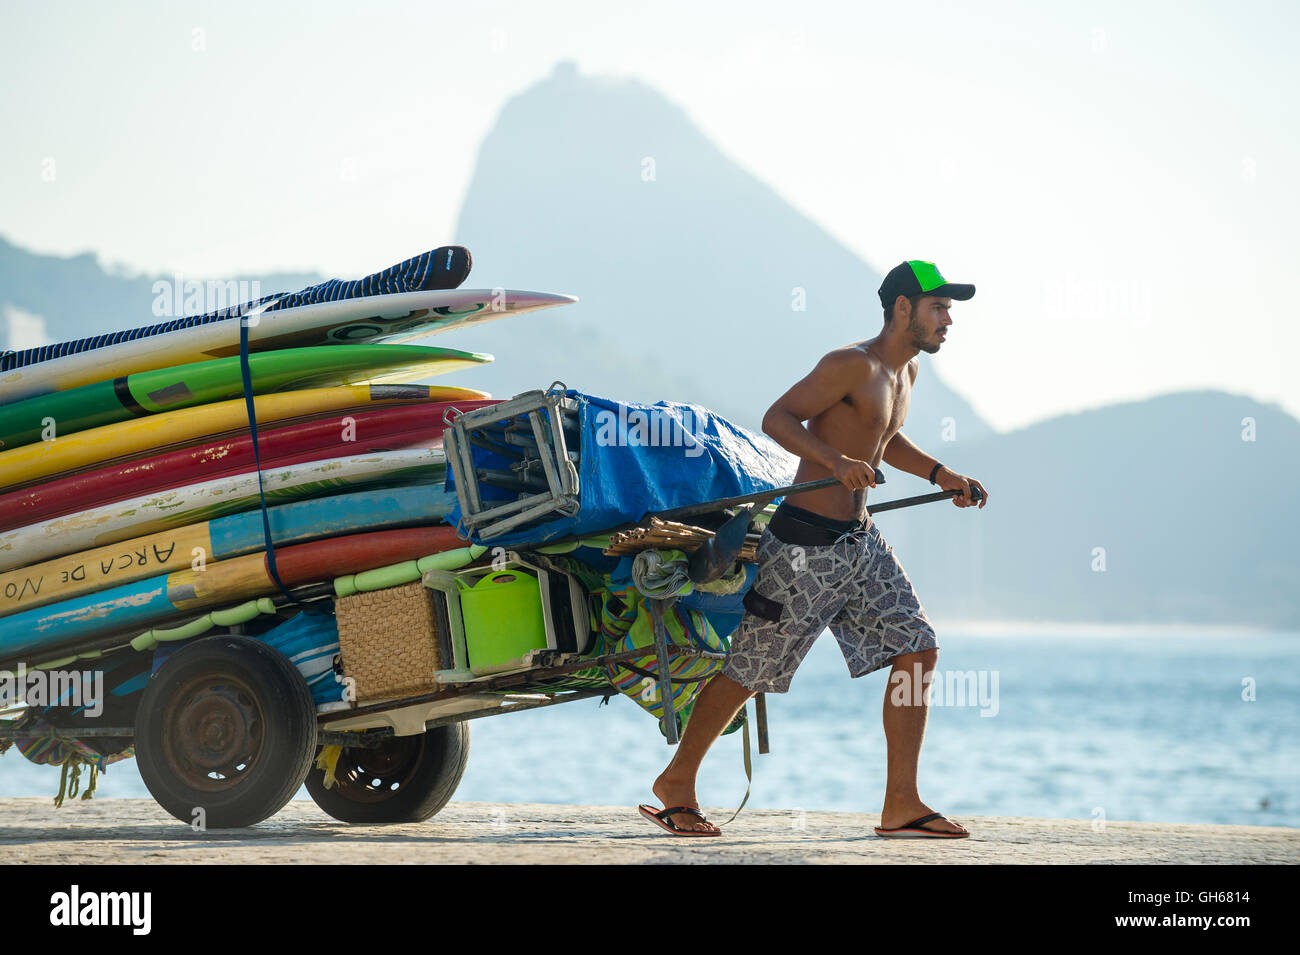 RIO DE JANEIRO - APRIL 5, 2016: Young carioca Brazilian man pulls a cart of stand up paddle SUP surfboards. Stock Photo